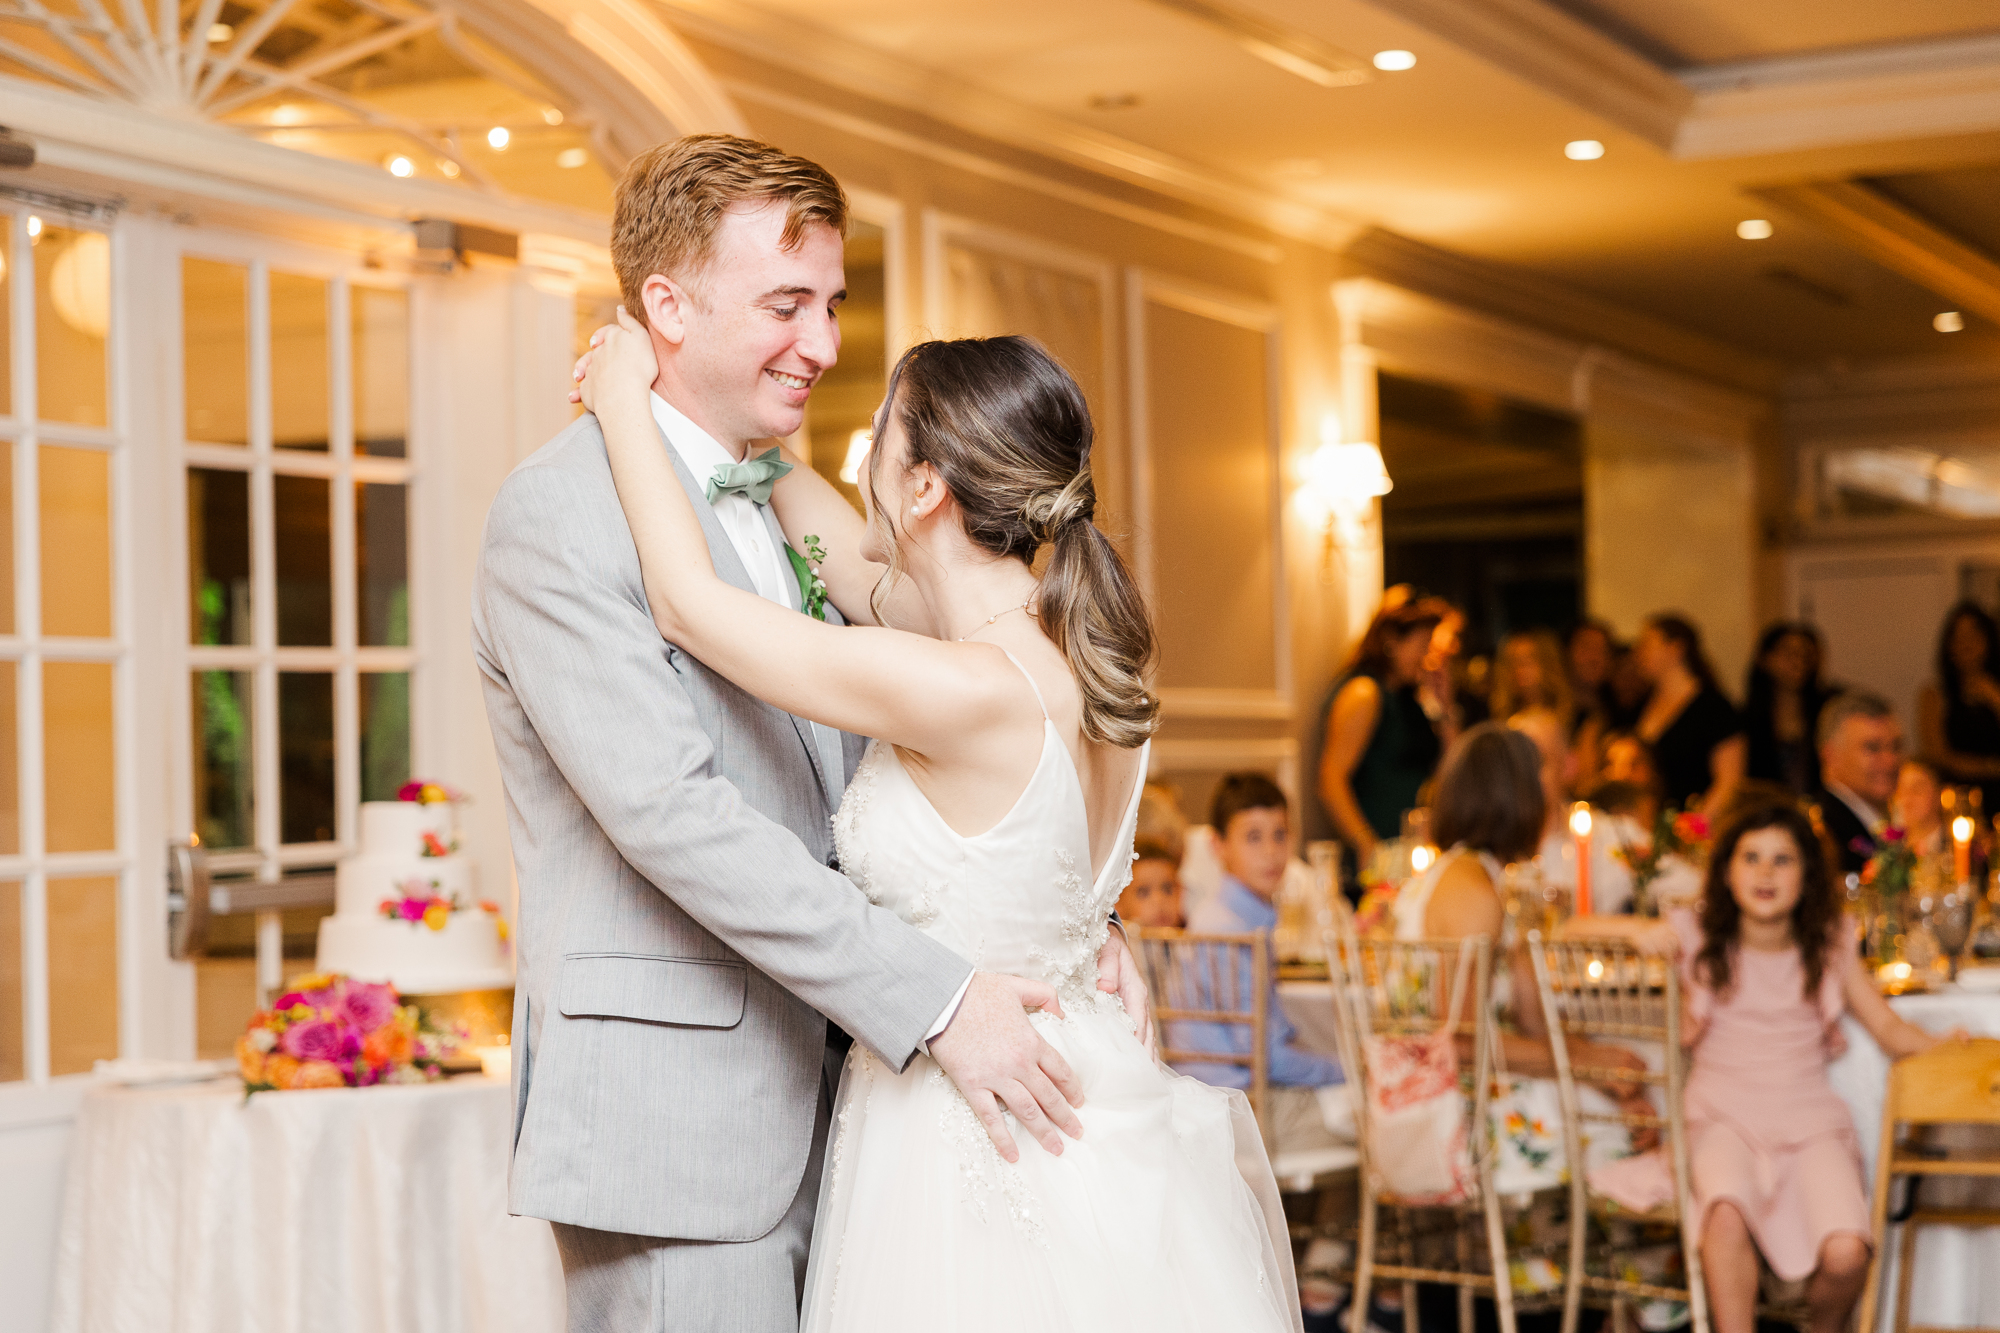 Vibrant Wedding at Briarcliff Manor in Summertime